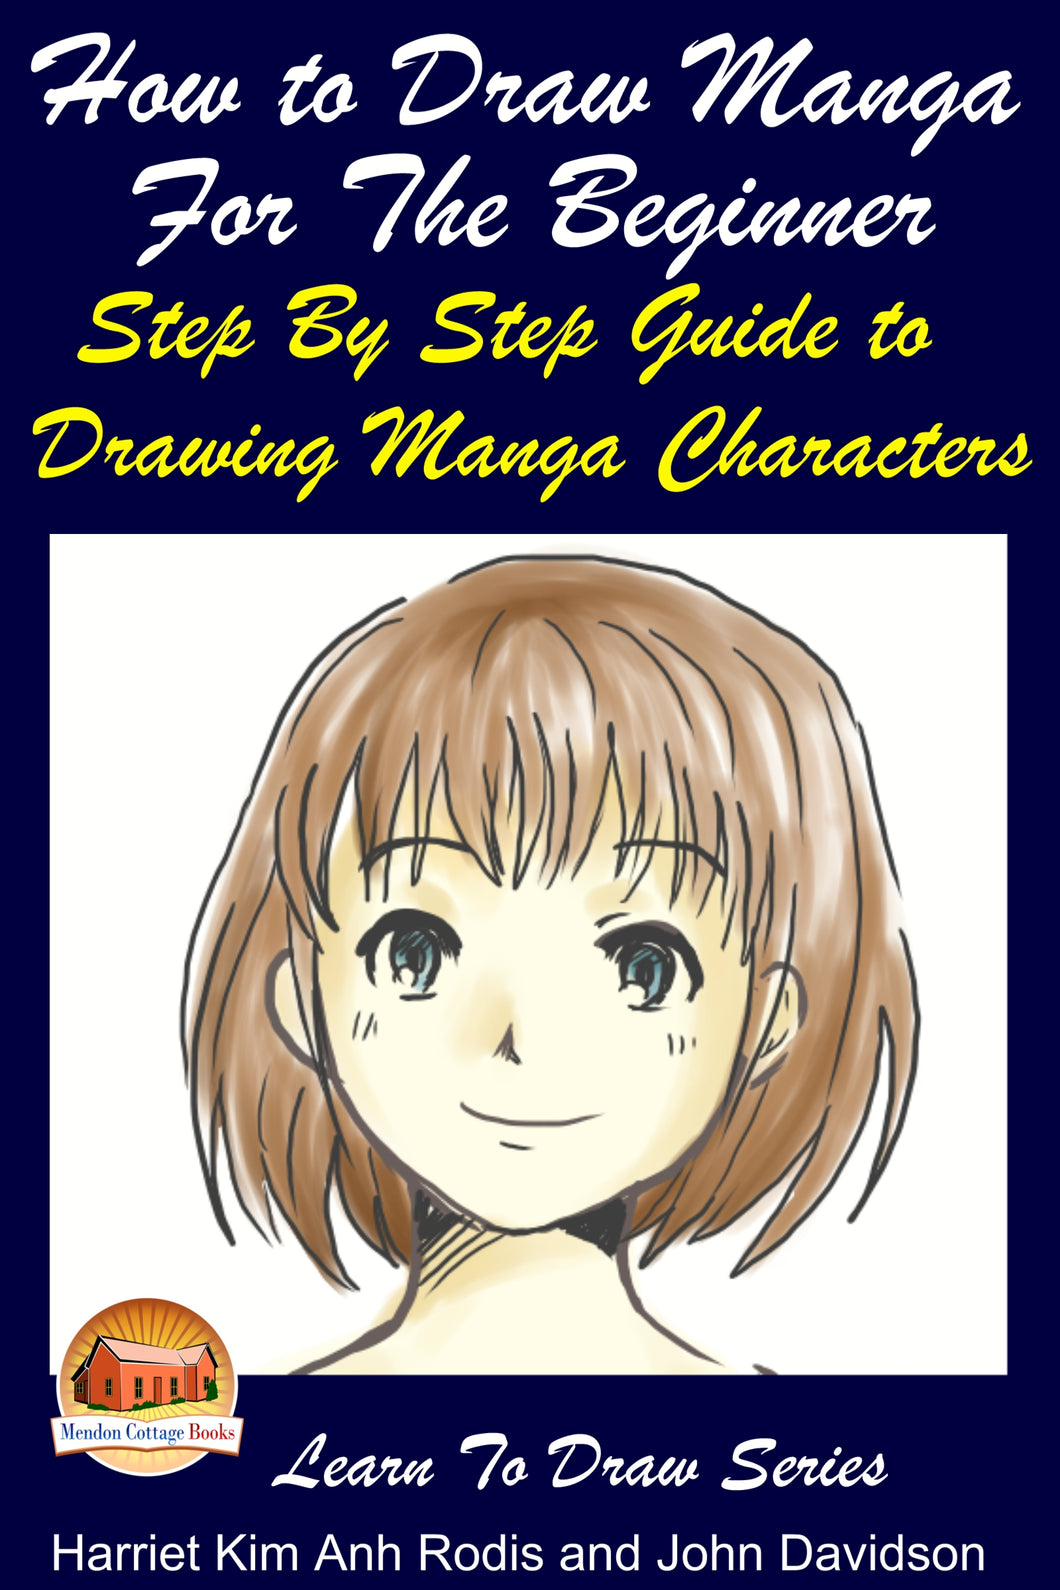 How to Draw Manga For the Beginner - Step By Step Guide to Drawing Manga Characters